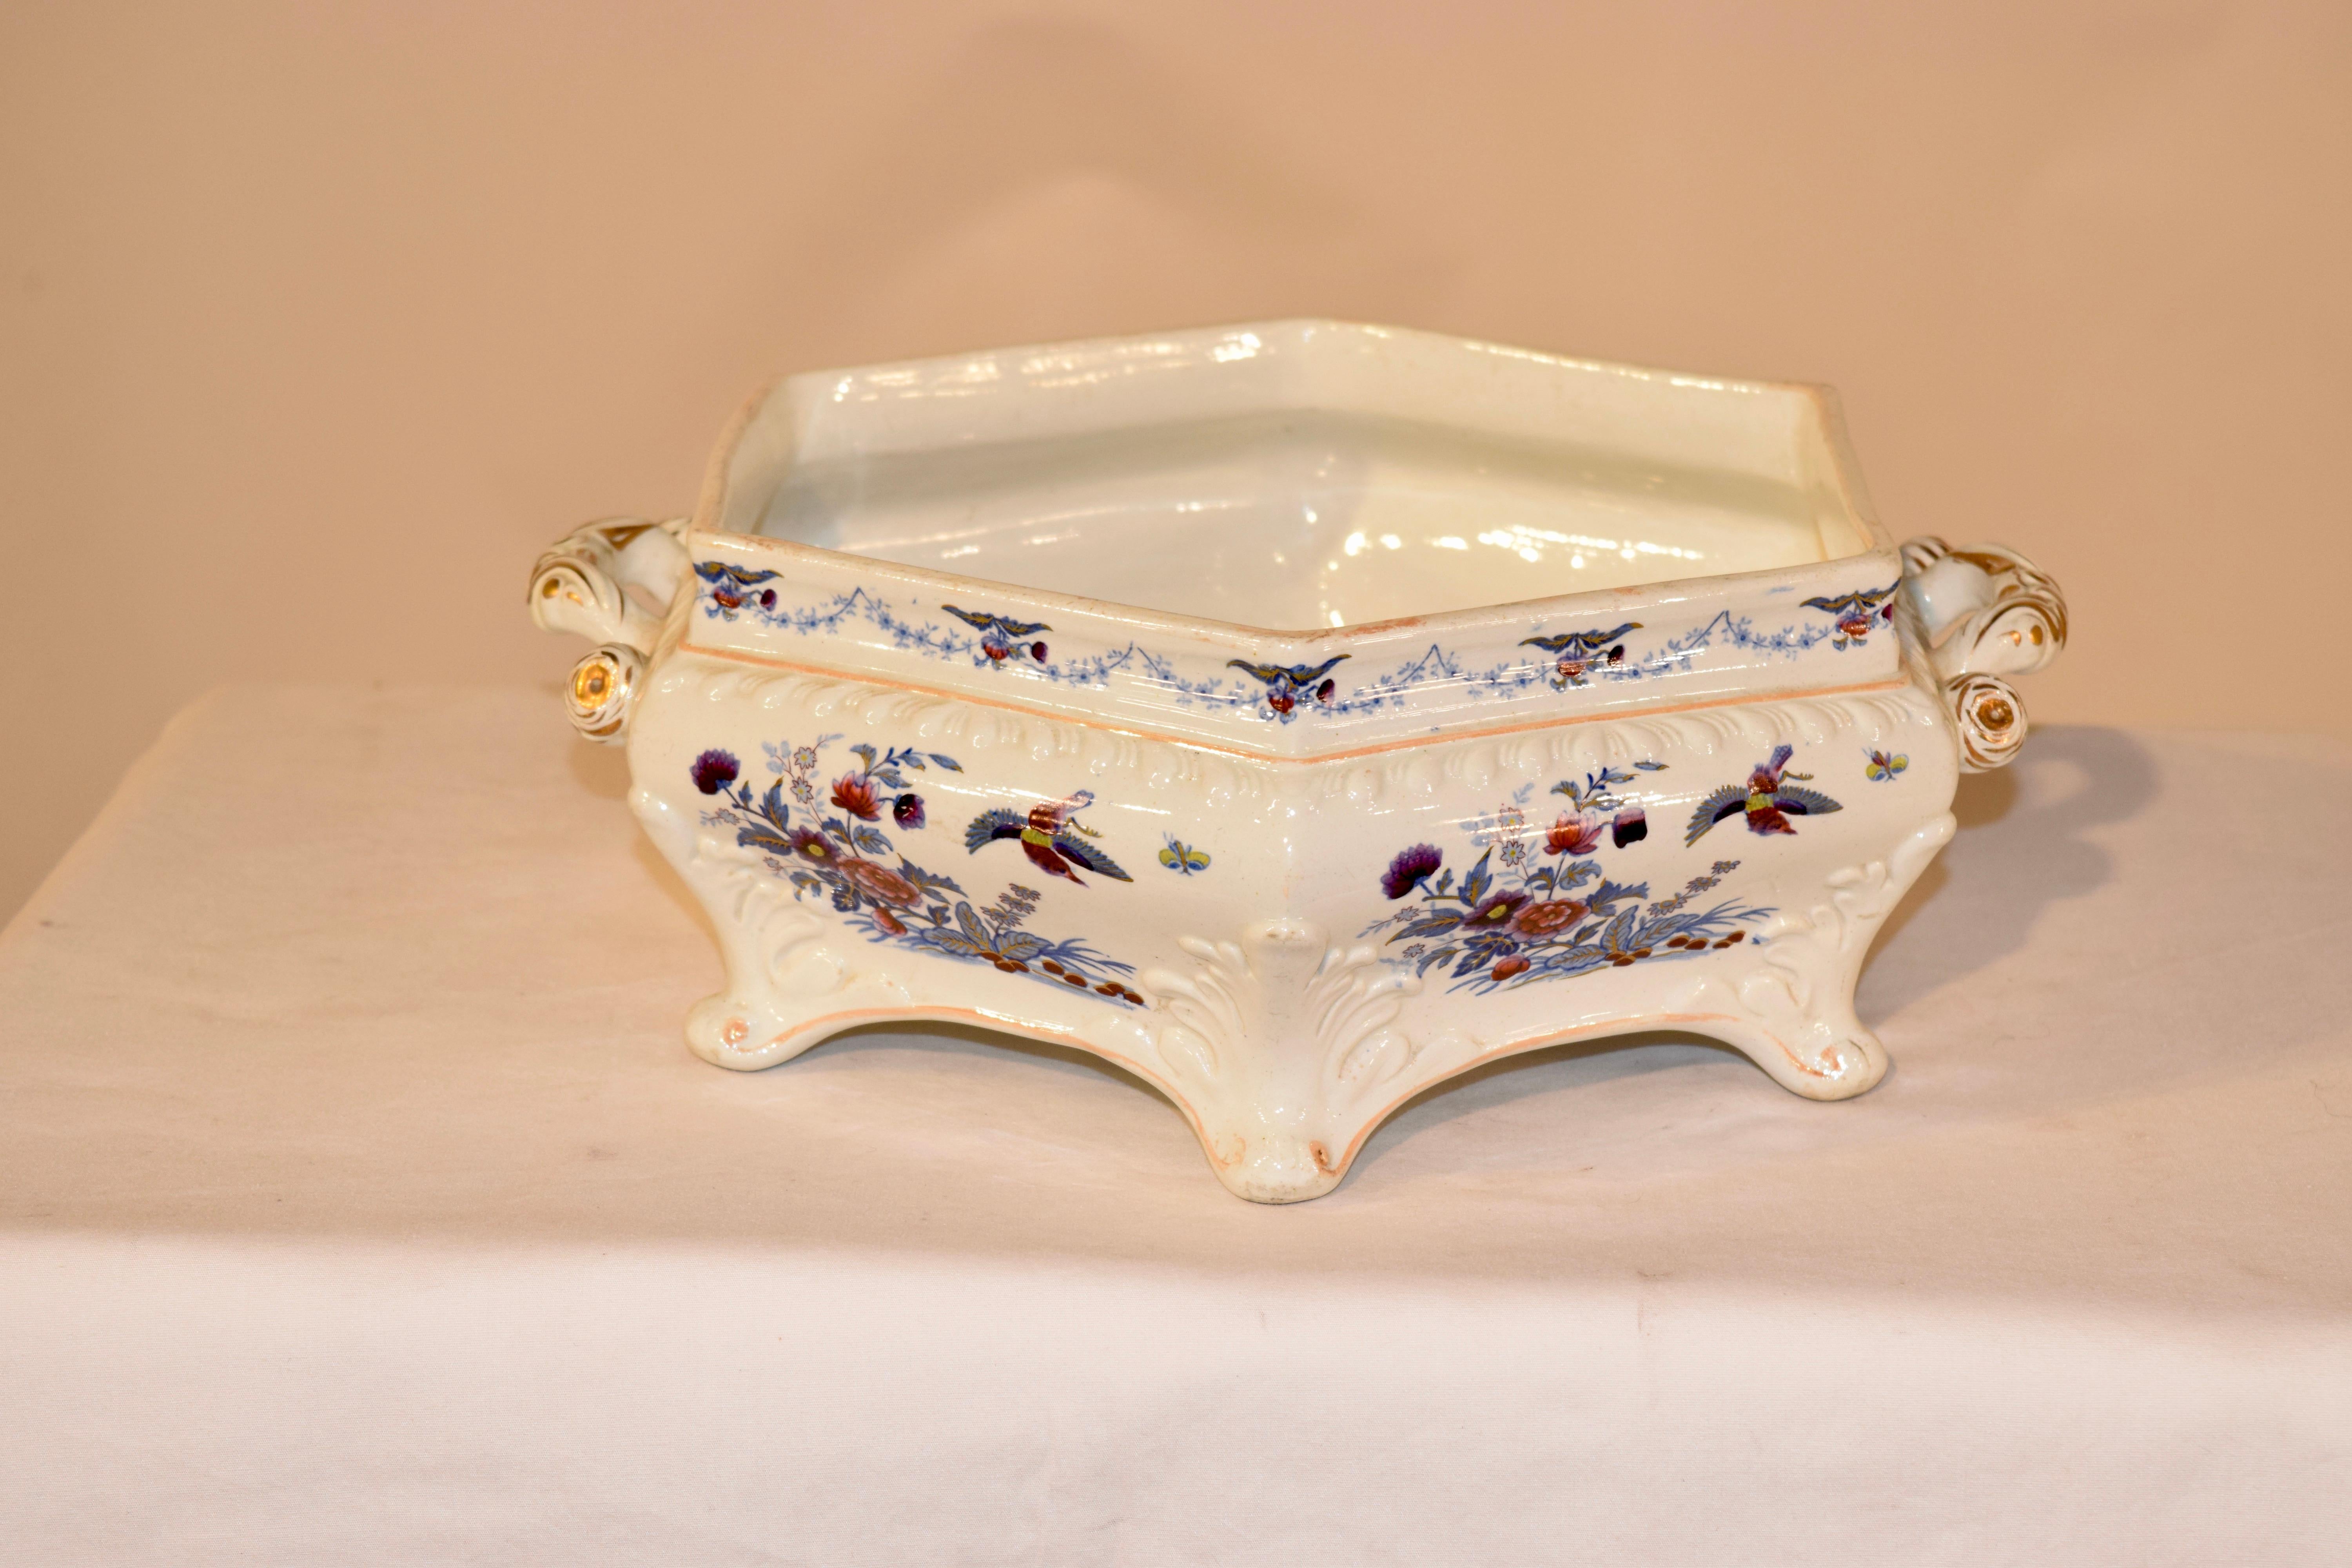 19th century transfer ware bowl with six sides in the 